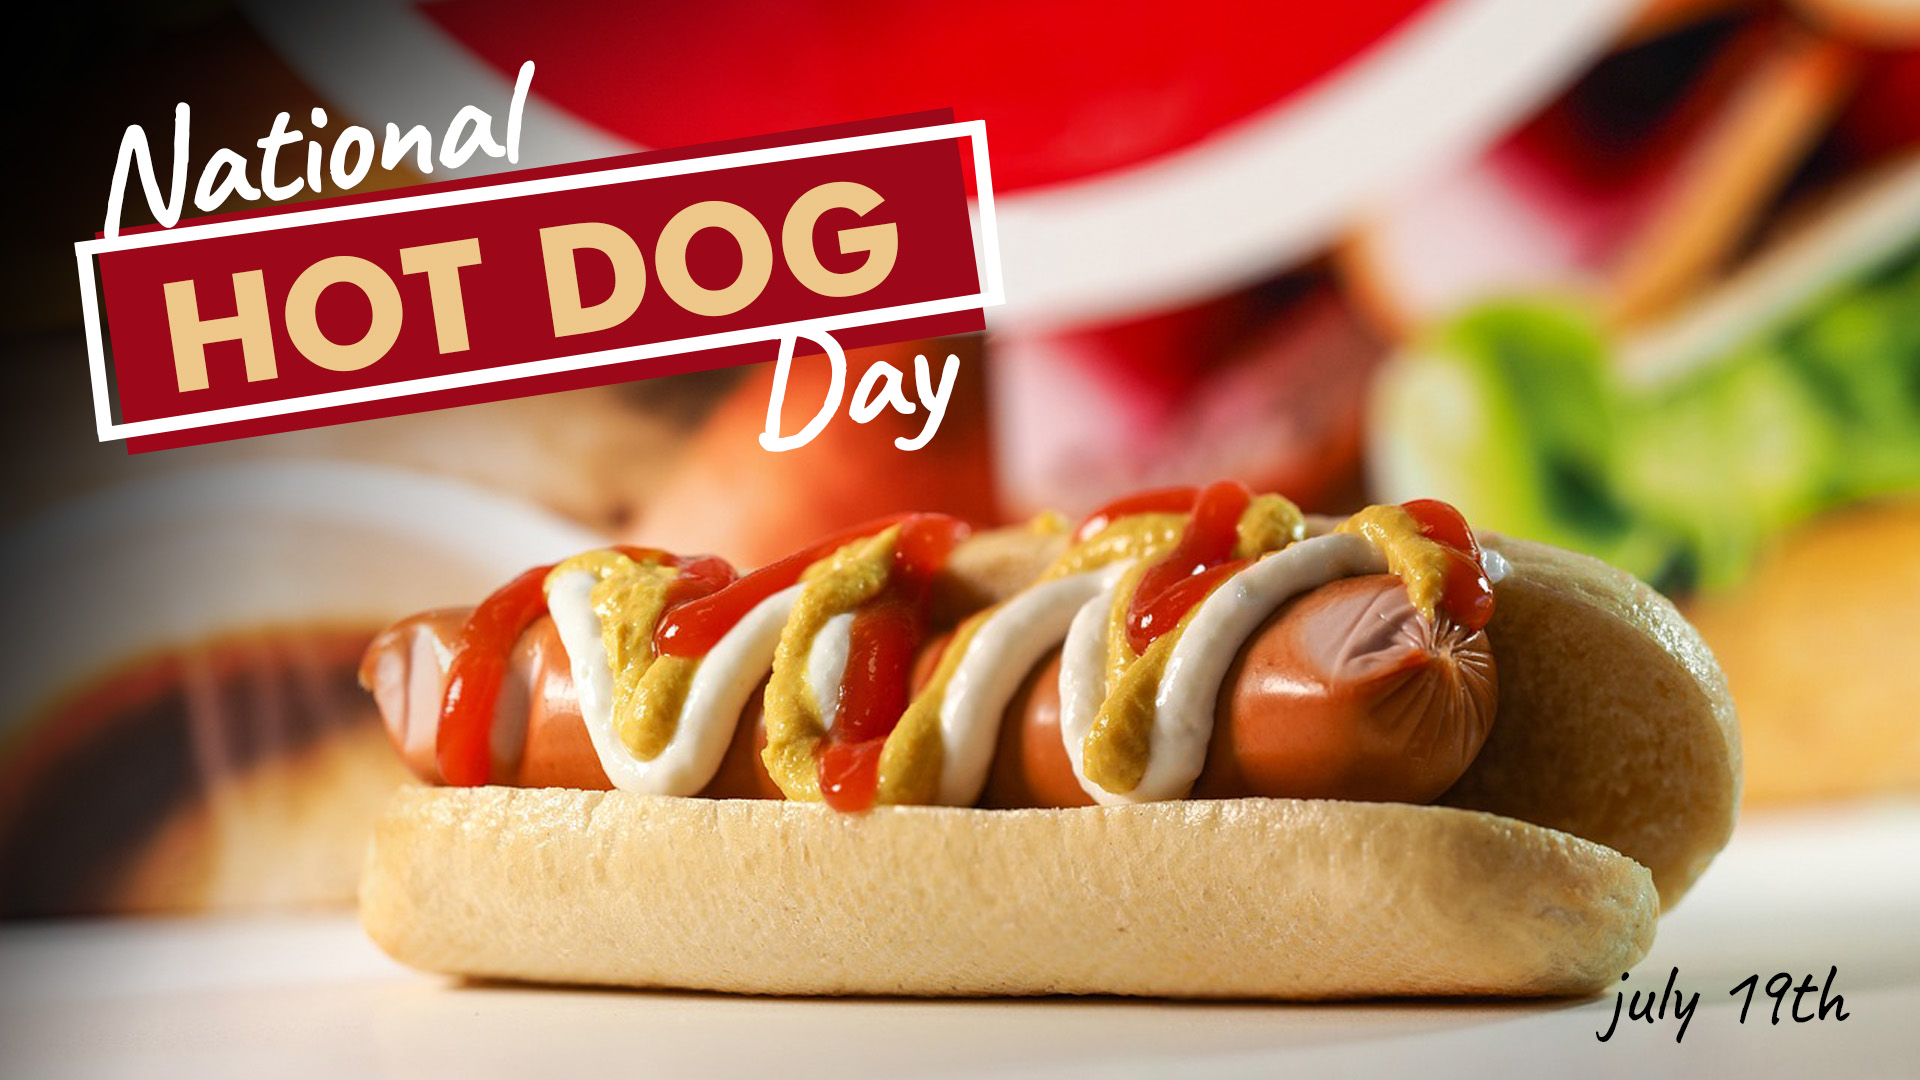 A photo of a hot dog in a bun laying on a white table with a blurred out colorful background. On the top left side of the image there is text that reads National Hot Dog Day with emphasis on the Hot Dog. On the bottom right corner of the image it reads July 19th in black text.